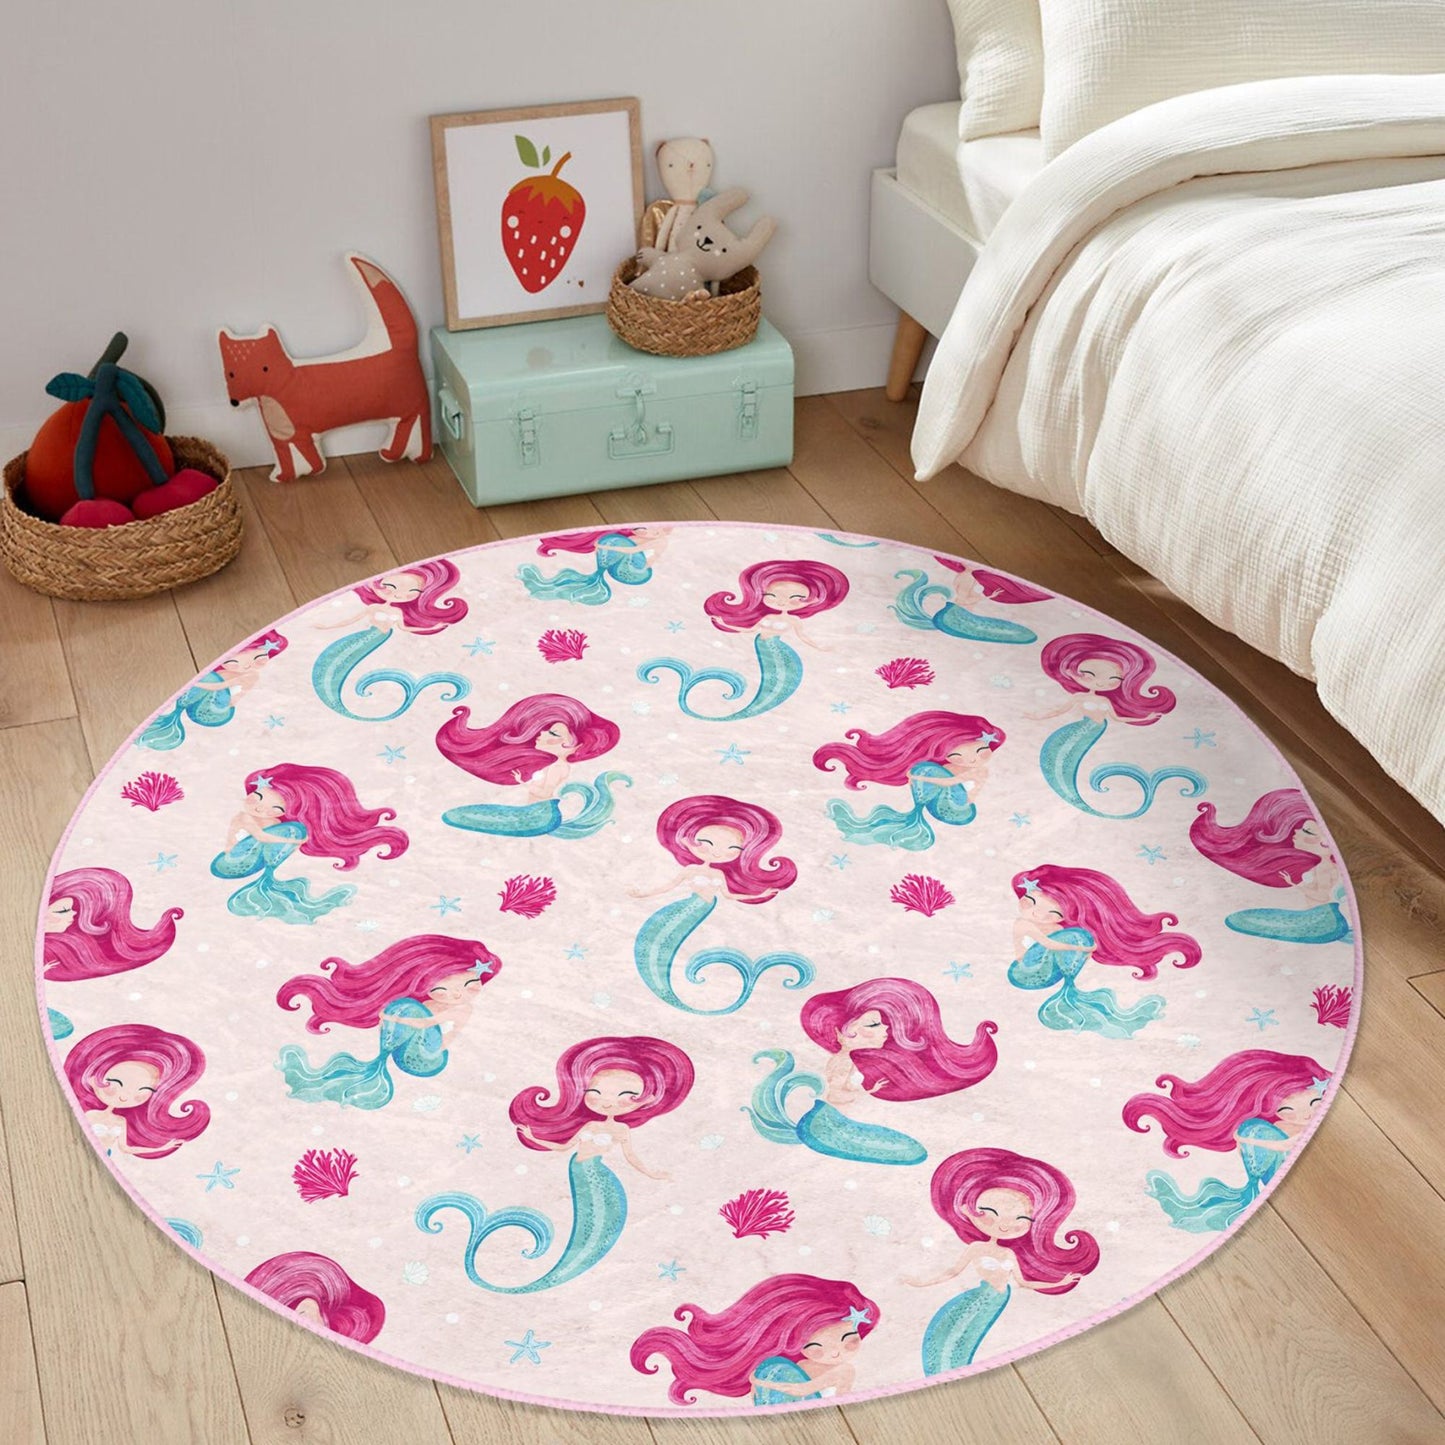 Homeezone Girls Room Rug - Dive into a World of Mermaids and Magic